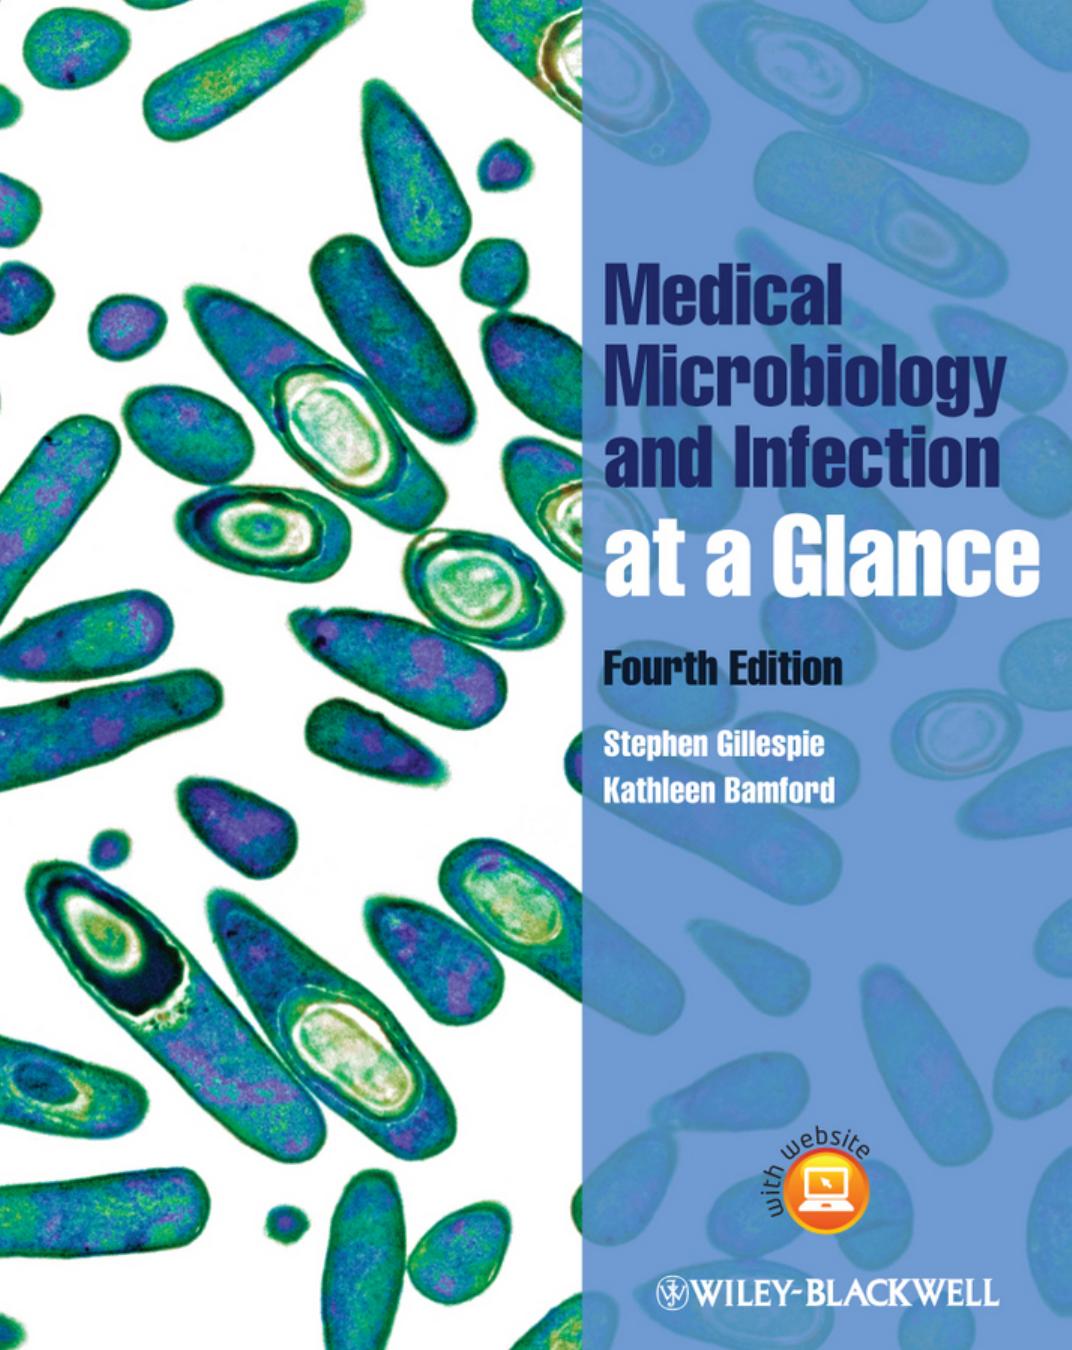 Medical Microbiology and Infection at a Glance, Fourth edition